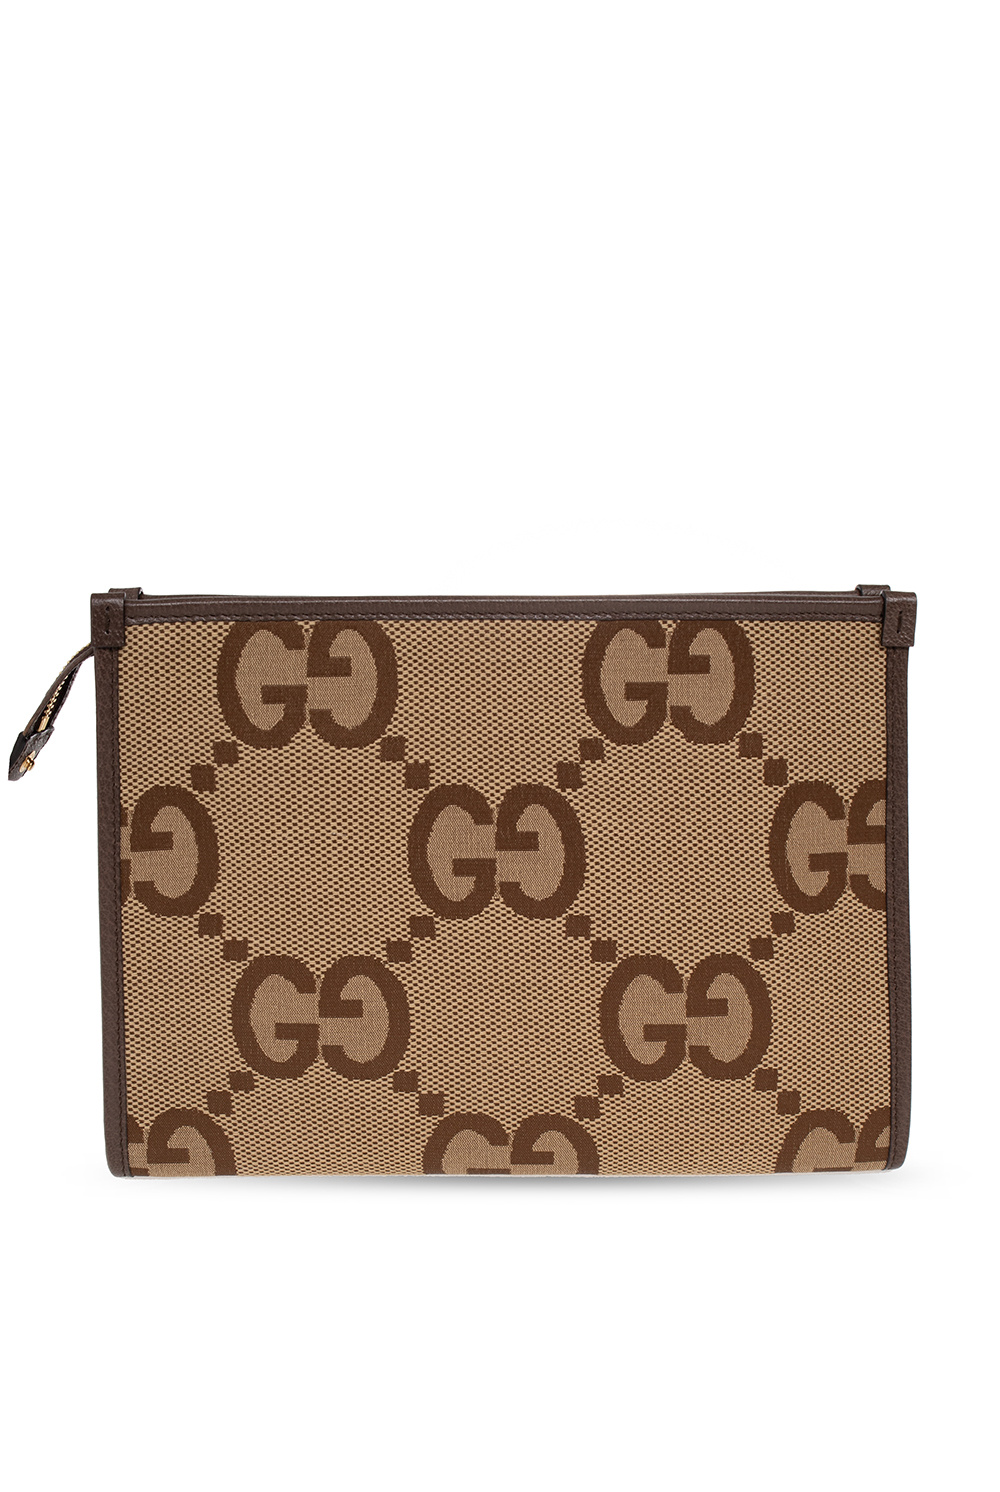 Gucci Beige & Brown Snakeskin Leather Bag With Black Bamboo Top Handles  Gucci